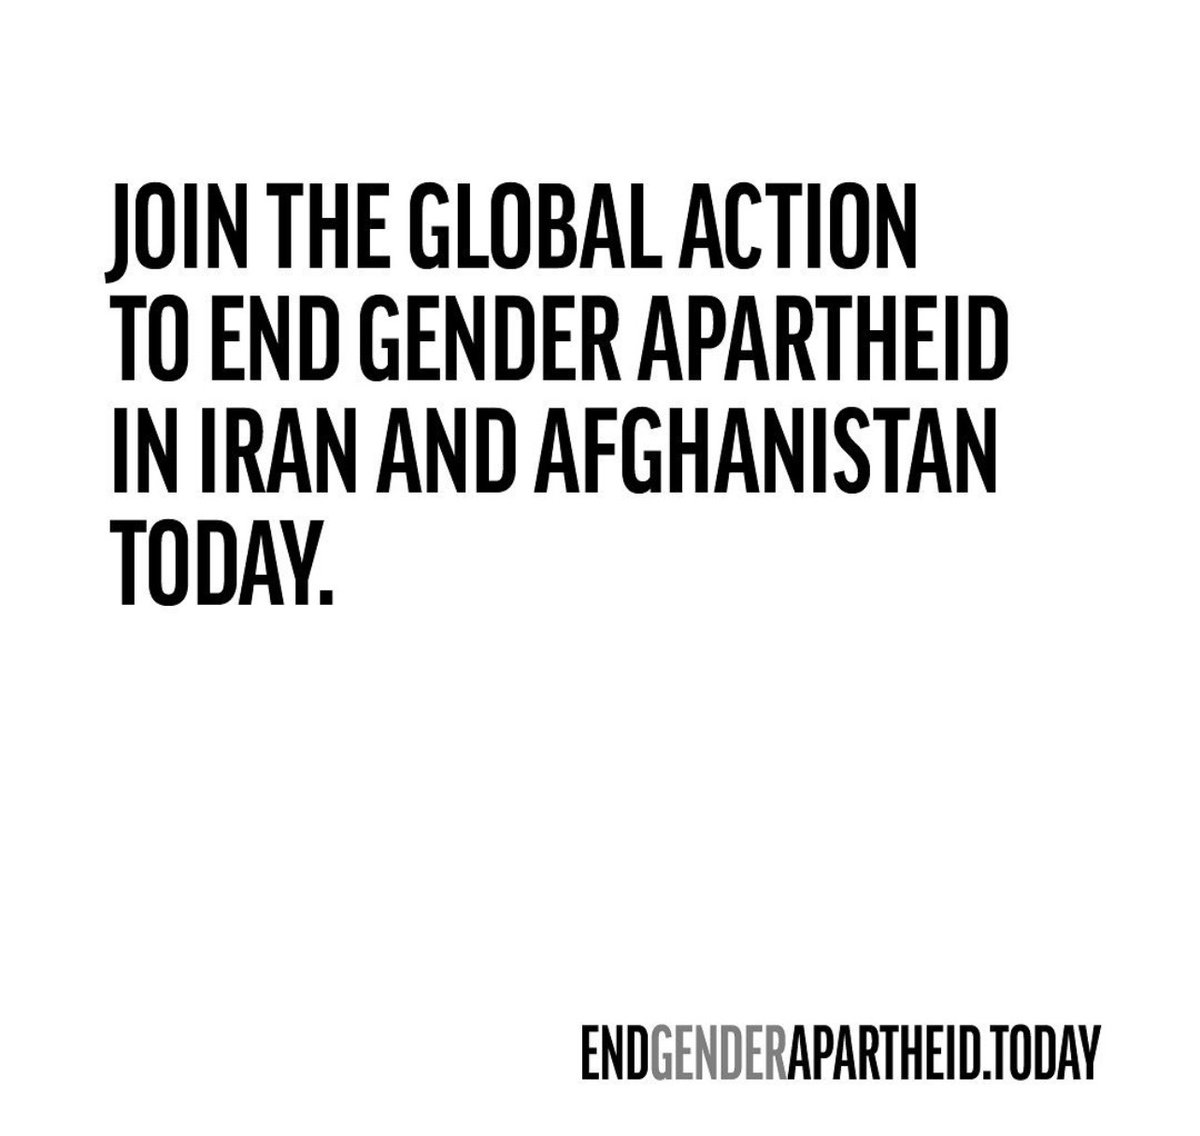 Stand by the women & girls of Afghanistan & Iran and demand that we expand the legal definition of apartheid under international laws. Sign our open letter now: endgenderapartheid.today #EndGenderApartheid